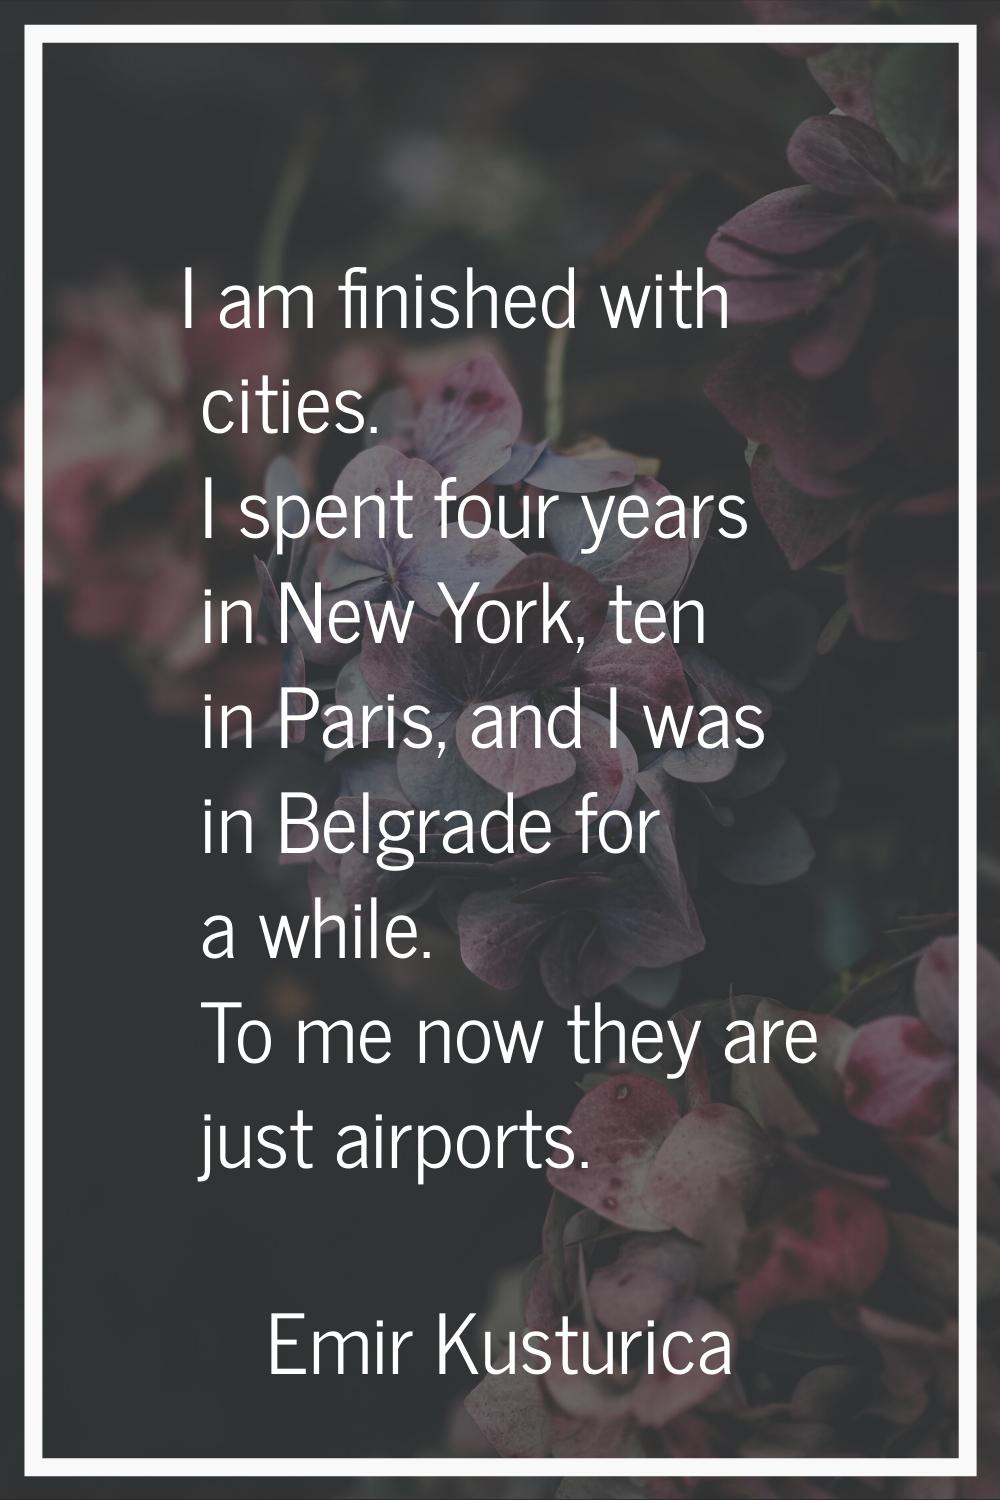 I am finished with cities. I spent four years in New York, ten in Paris, and I was in Belgrade for 